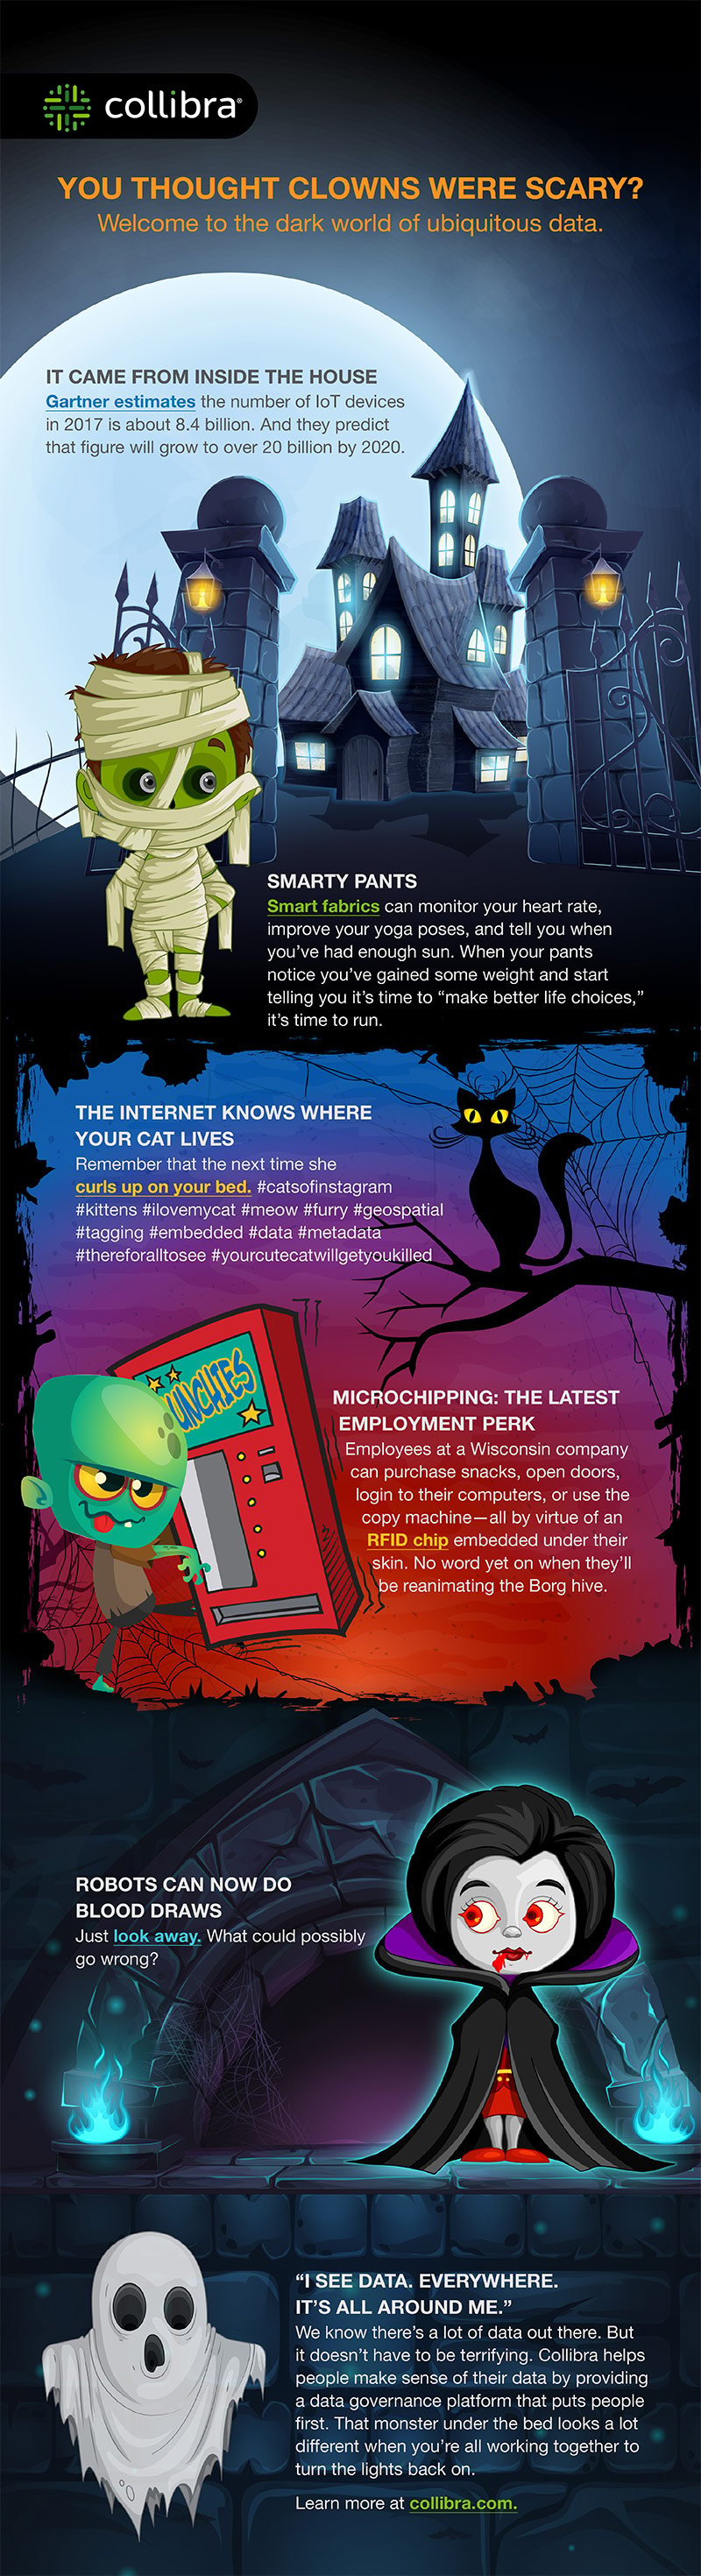 Scary Data Infographic